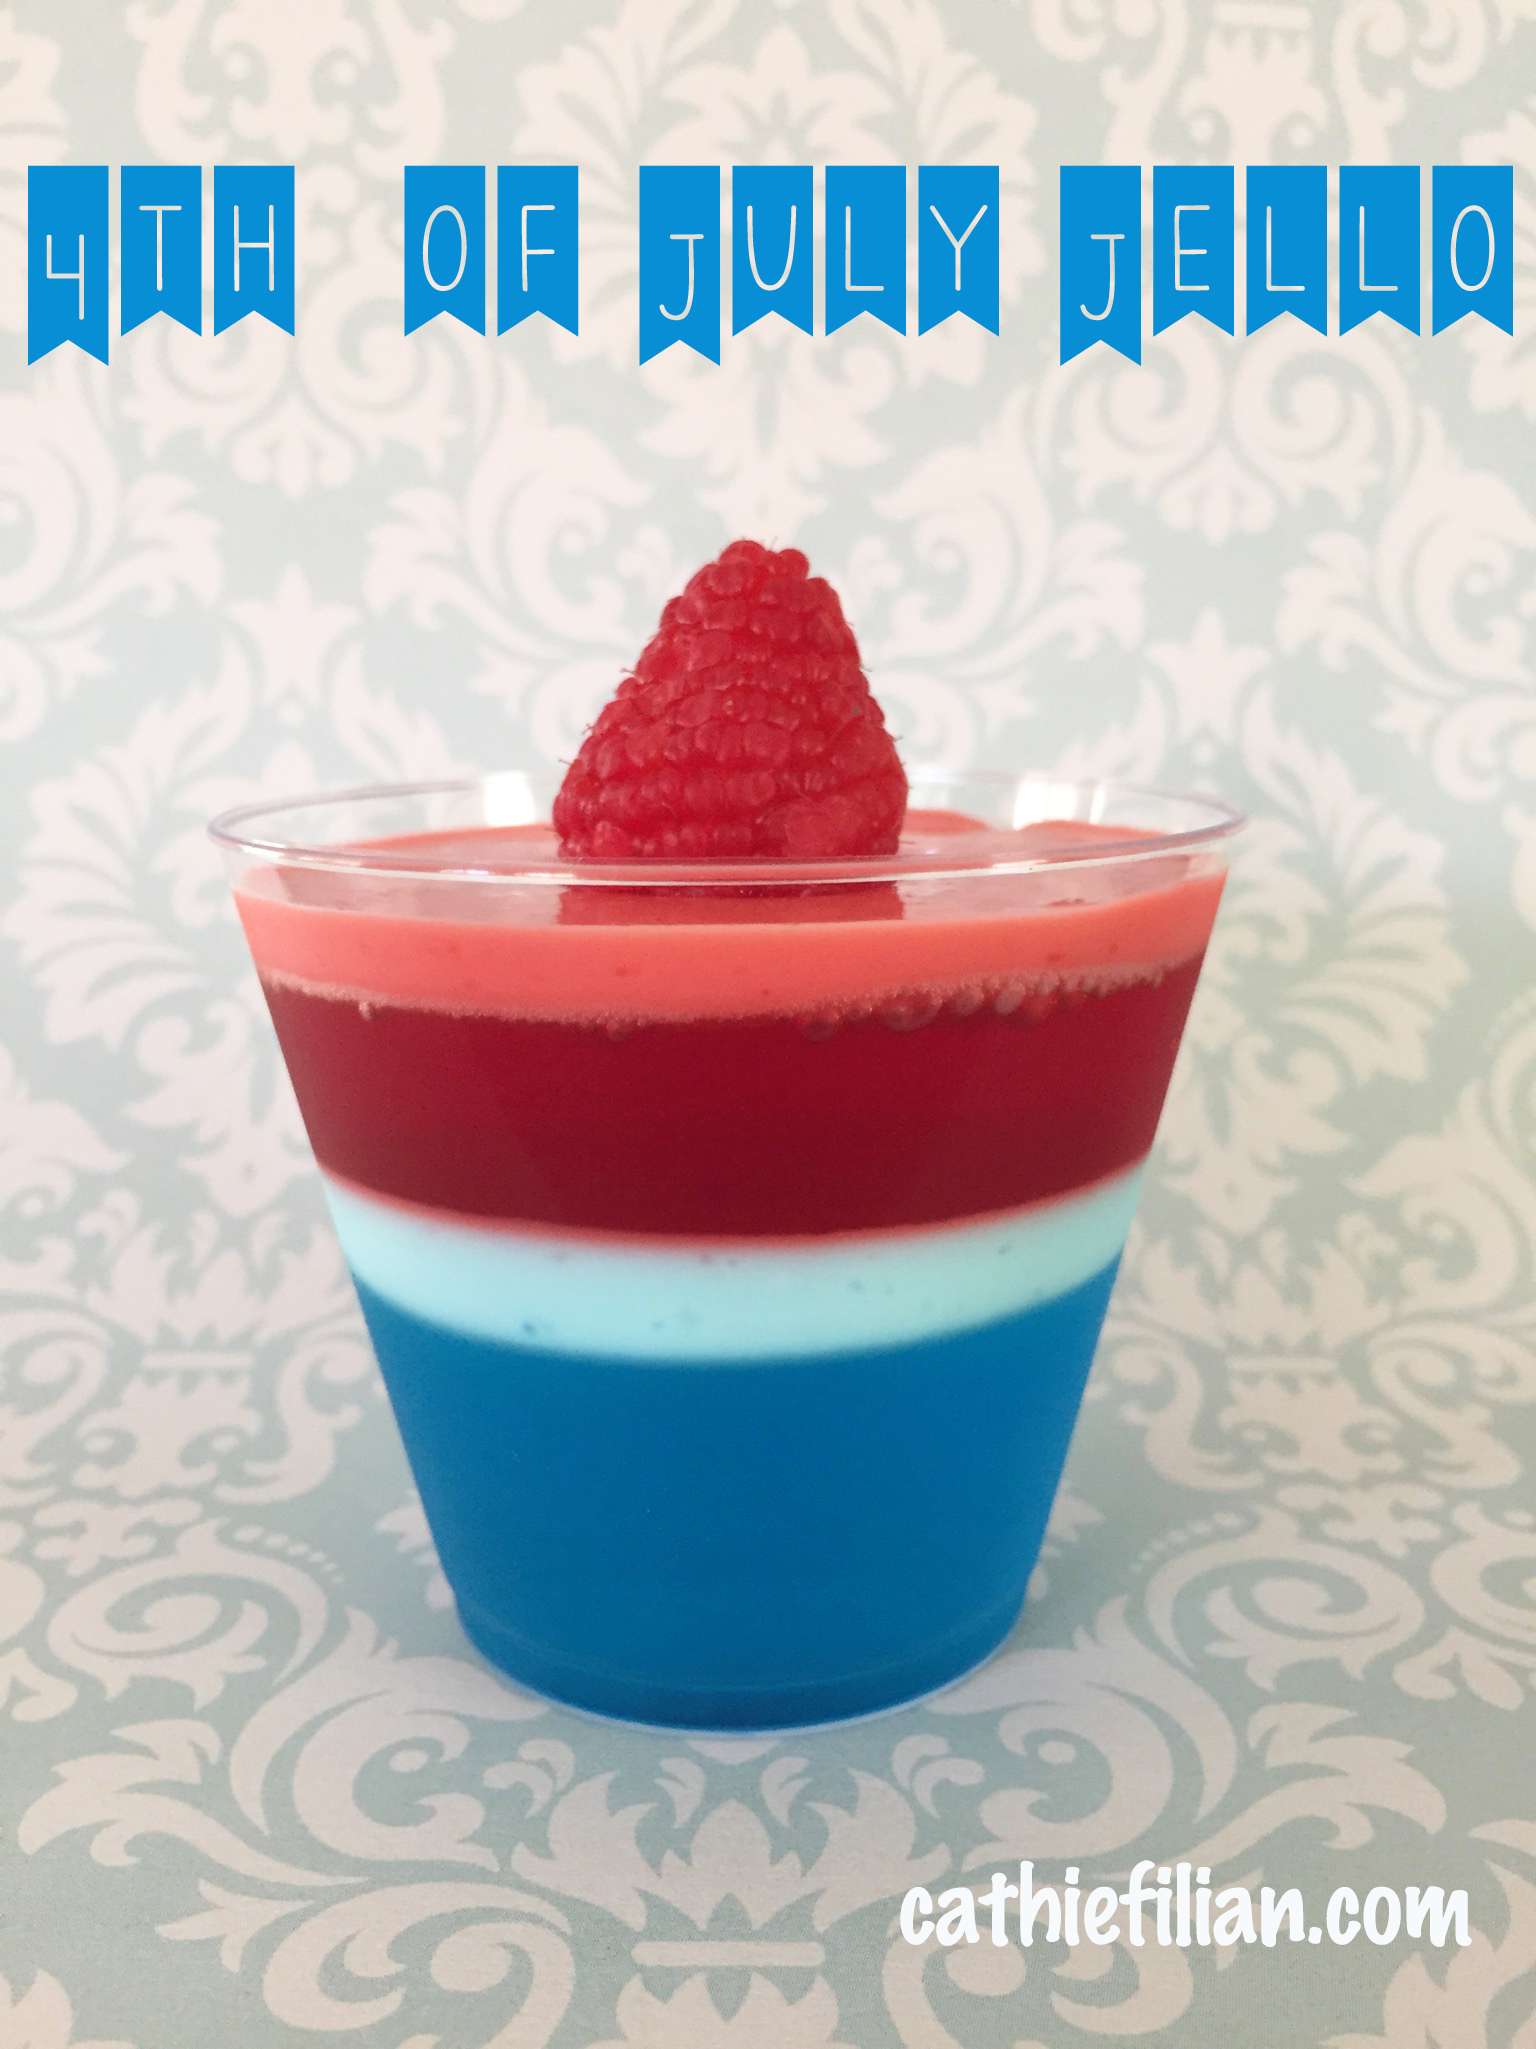 Red, White and Blue Jello Cups for the 4th of July - Handmade Happy Hour